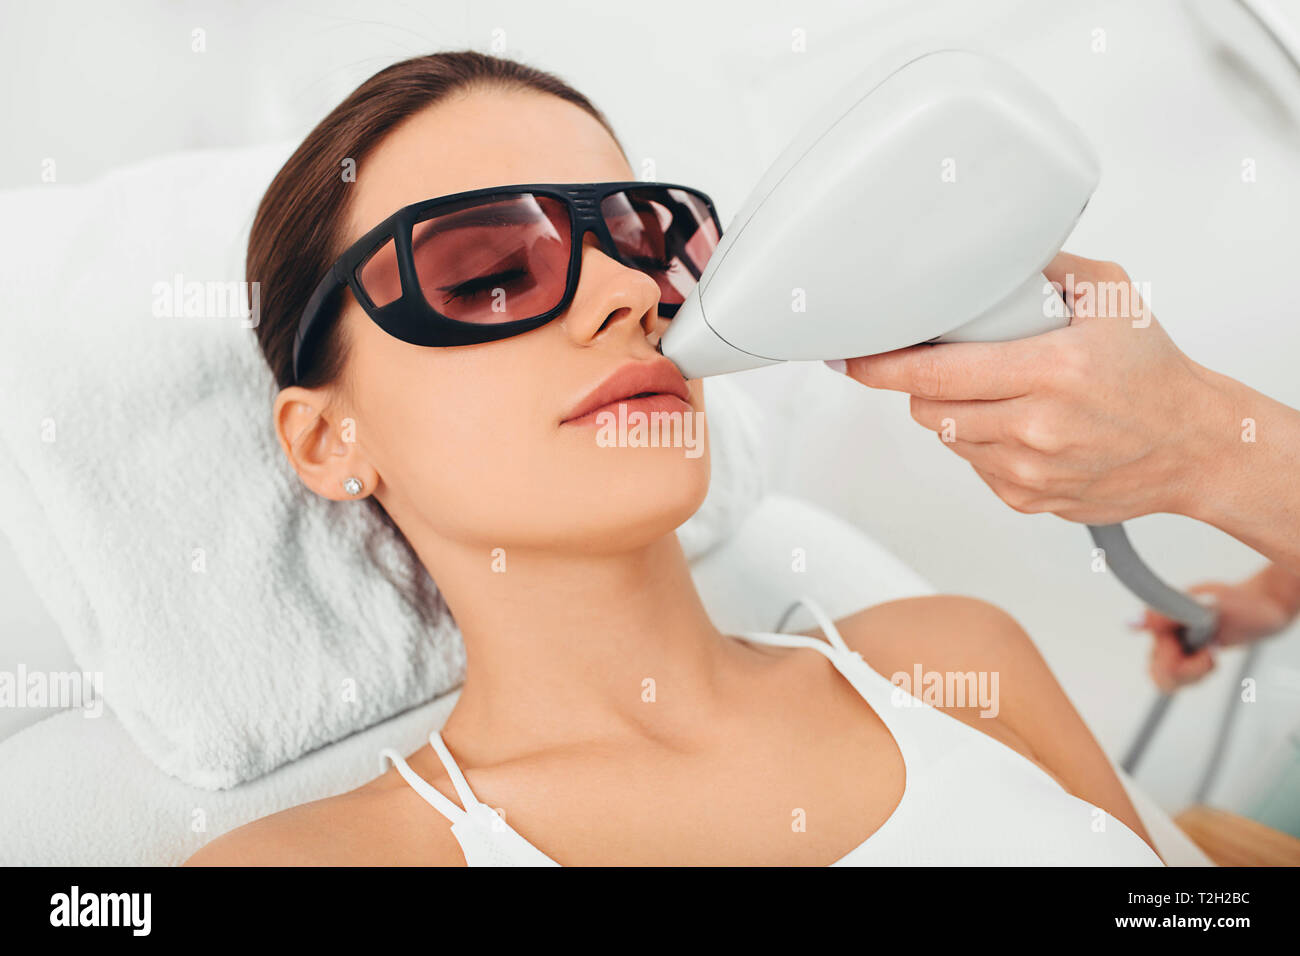 Woman getting laser hair removal on her face , hair removal on lip area Stock Photo